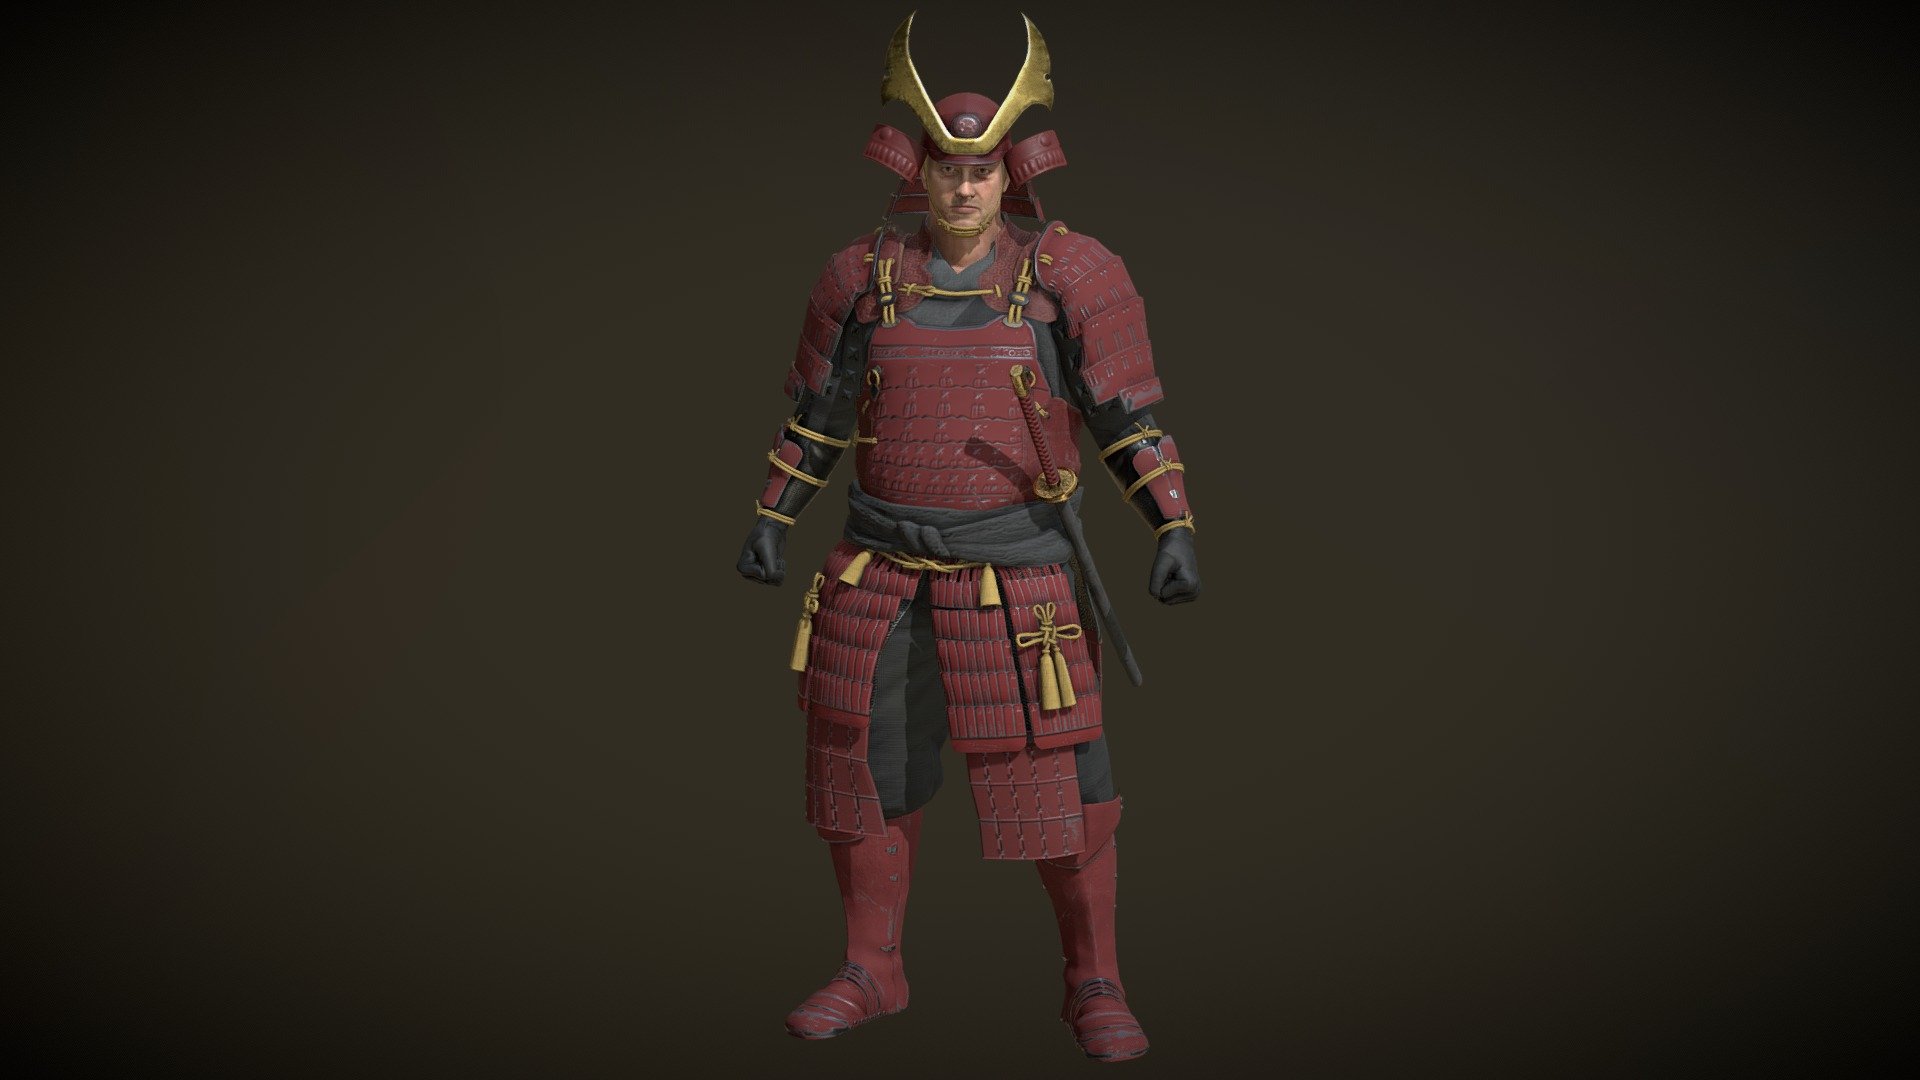 Samurai:
Complete archive in additional file.

Character in A-pose ( Game Version).




High details.

Highres unique textures.

Rigged.

Exported to Unreal ( migrate files). Use same standard unreal mannequin skeleton. Can handle the same animations as Unreal mannequin from marketplace.

Highres Texturesets.

Professional Uv Layout.

Character mesh.

3d Game Ready Samurai Warrior Character.

High detail and realistic model.

Rigged, with high definition textures.

Texture types:




Albedo (Diffuse).

Normal.

Roughness.

Metallness.

ORM(Unreal Engine).
 - Samurai Character PBR Game Ready!! - Buy Royalty Free 3D model by lidiom4ri4 3d model